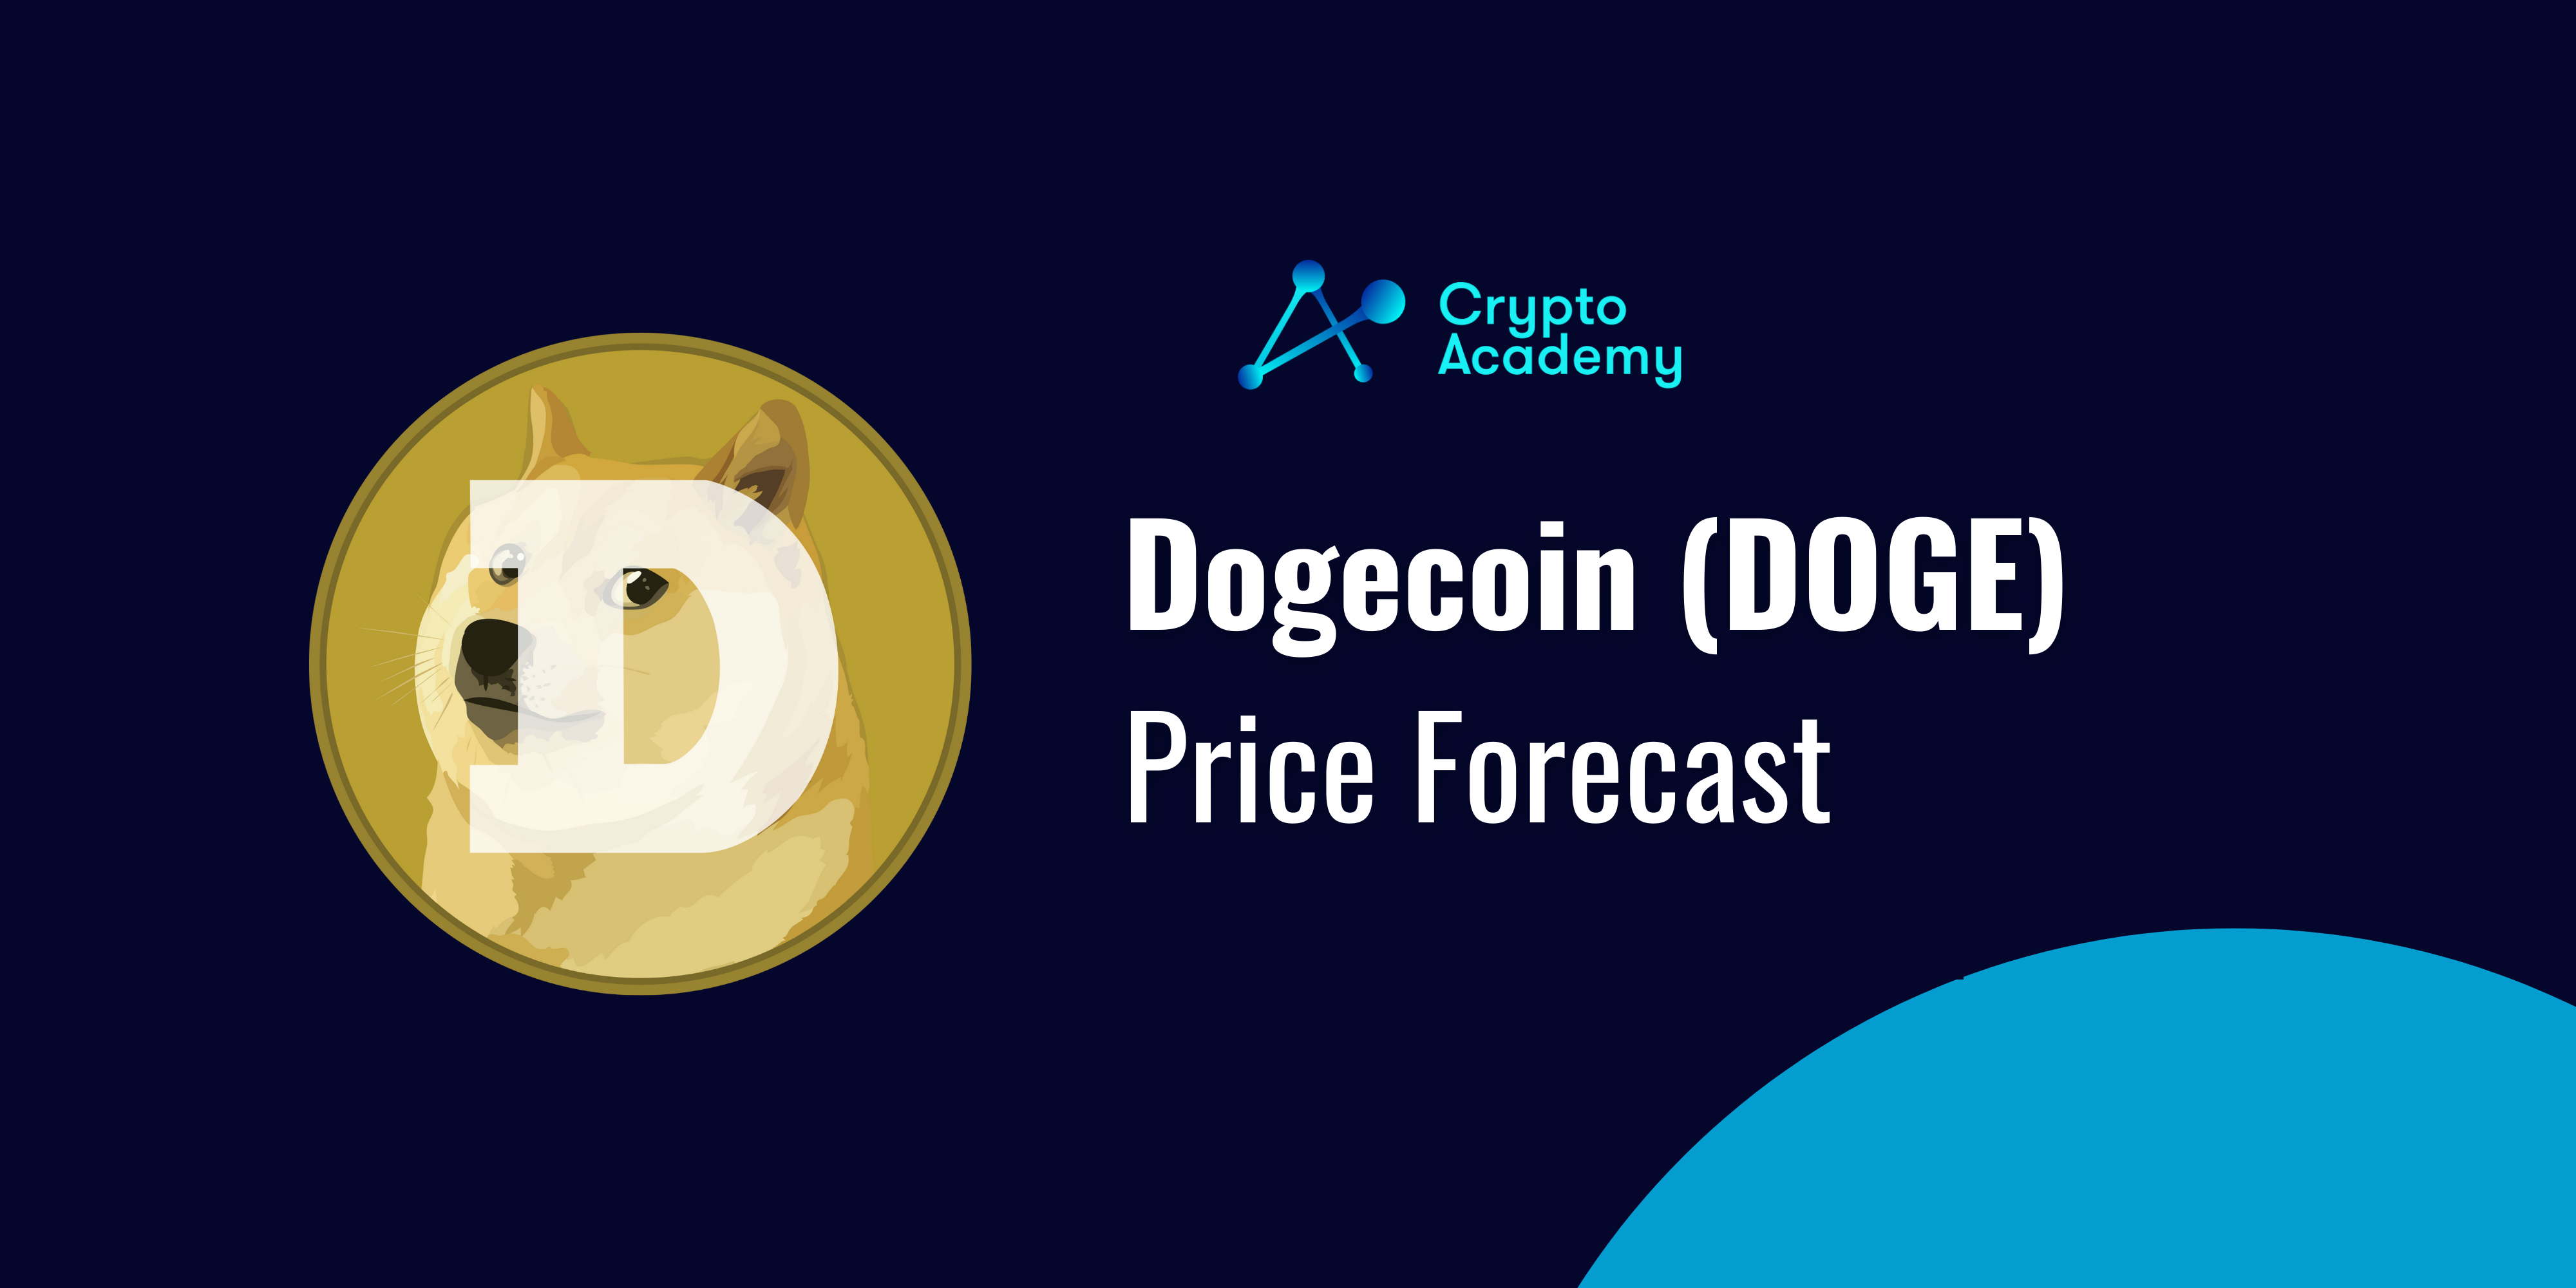 Dogecoin Price Forecast – Will DOGE Reach $1 in 2021?